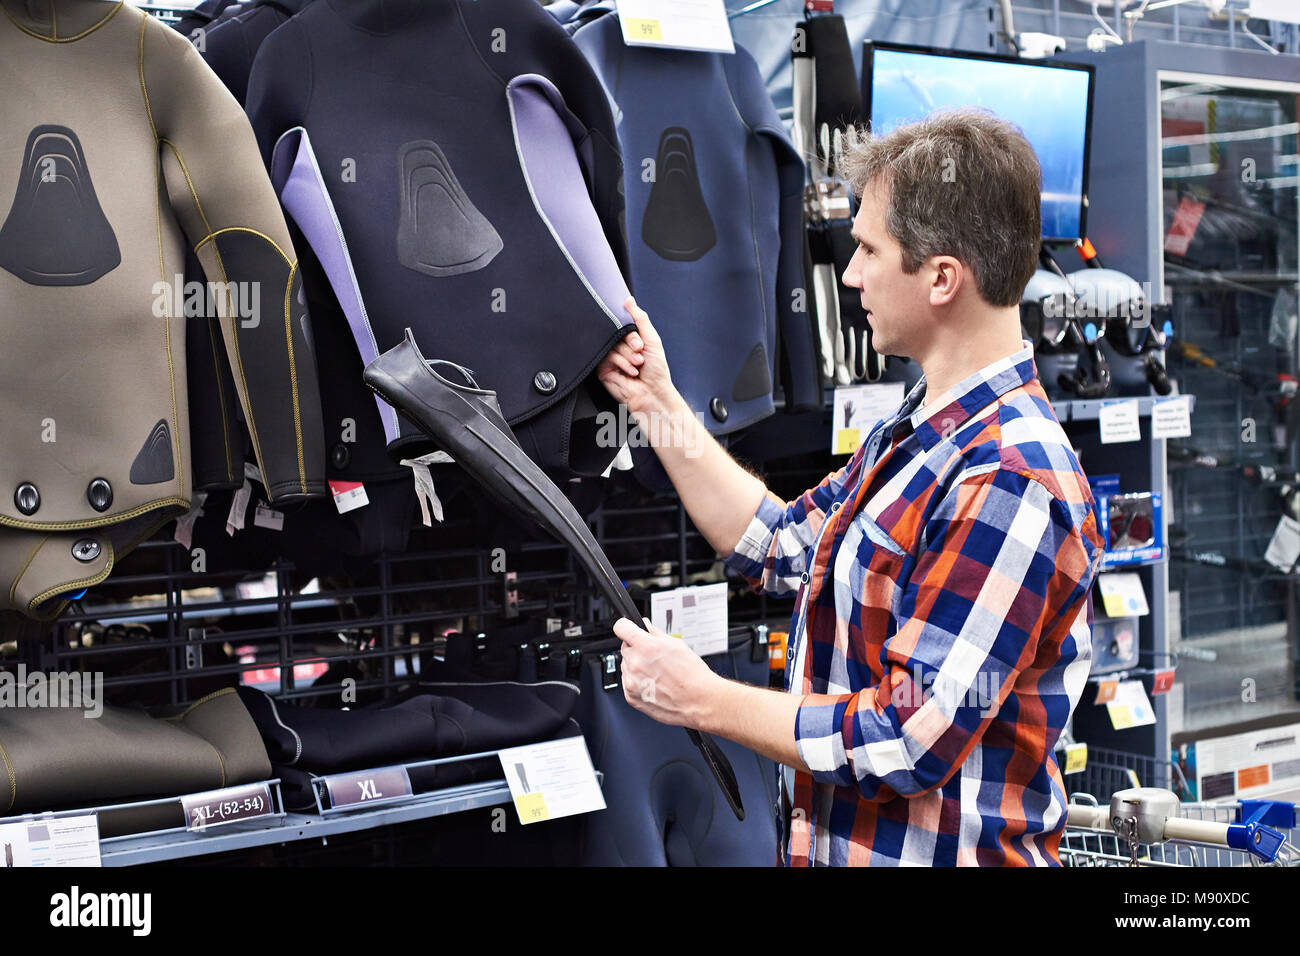 Man chooses a wetsuit and fins for spearfishing in a sports shop Stock Photo